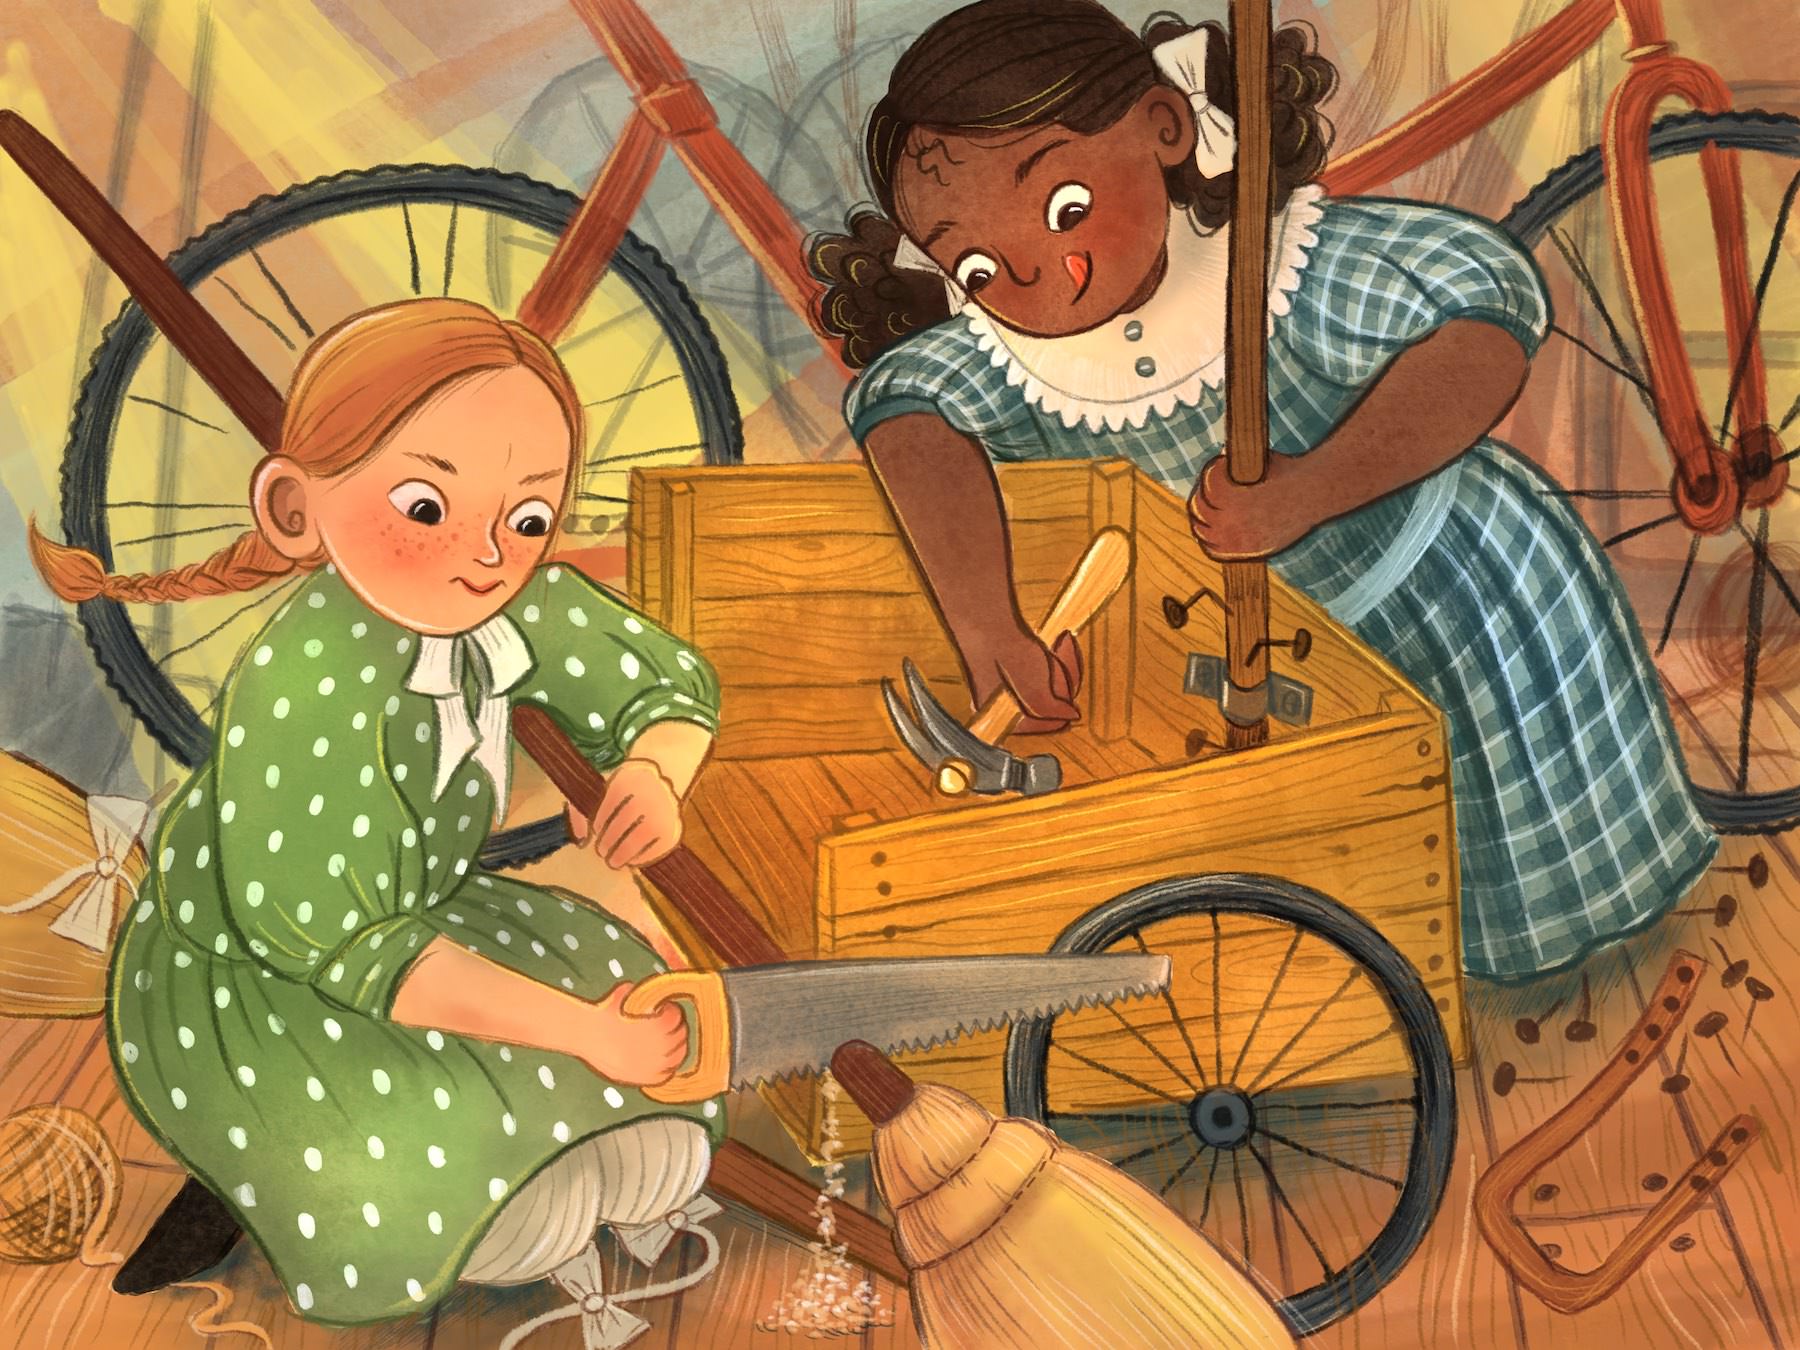 Children's book illustration showing 2 young girls, about age 8, working with hand tools. One girl has dark skin and curly dark hair and is wearing a blue plaid dress. She is using a hammer to put nails in a cart. Another girl has red hair and is wearing a green dress with white polkadots and a bow at the neck. She is using a saw to cut the end off of a broom. The background is abstract blue, yellow and red streaks, with faint outlines of tools and shelves.